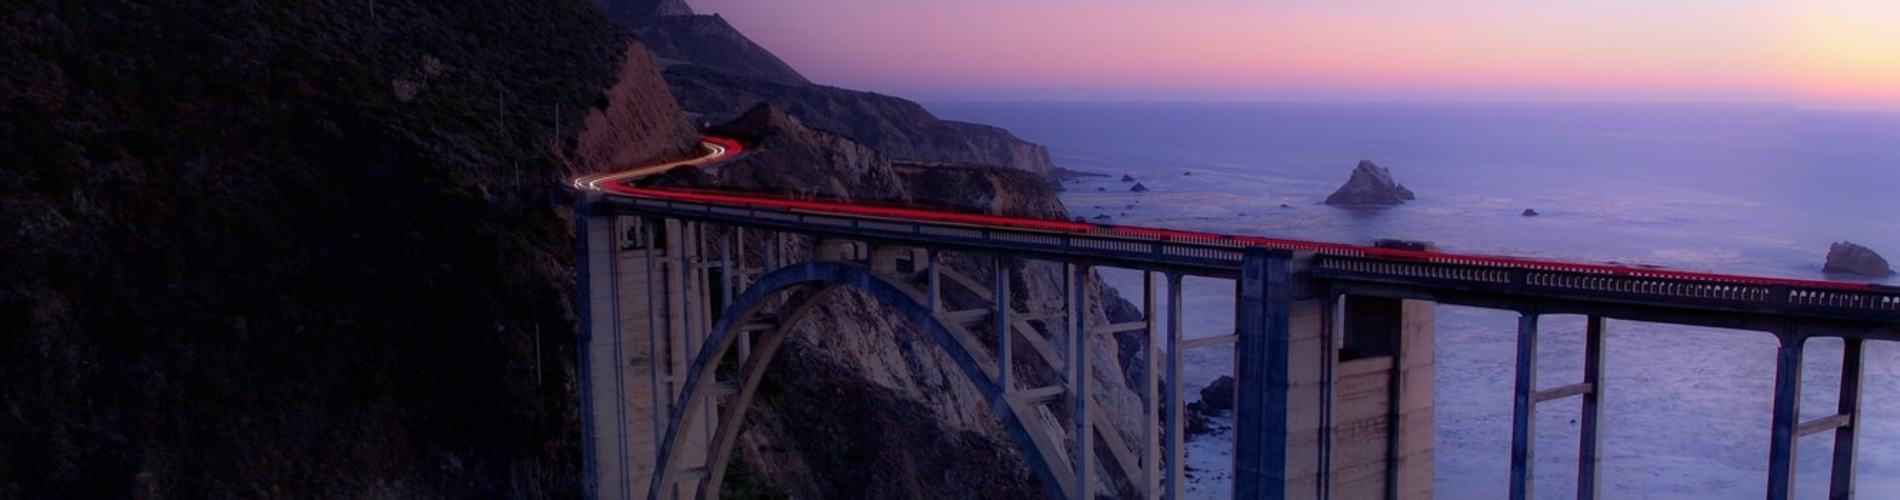 Pacific coast highway during the sunset